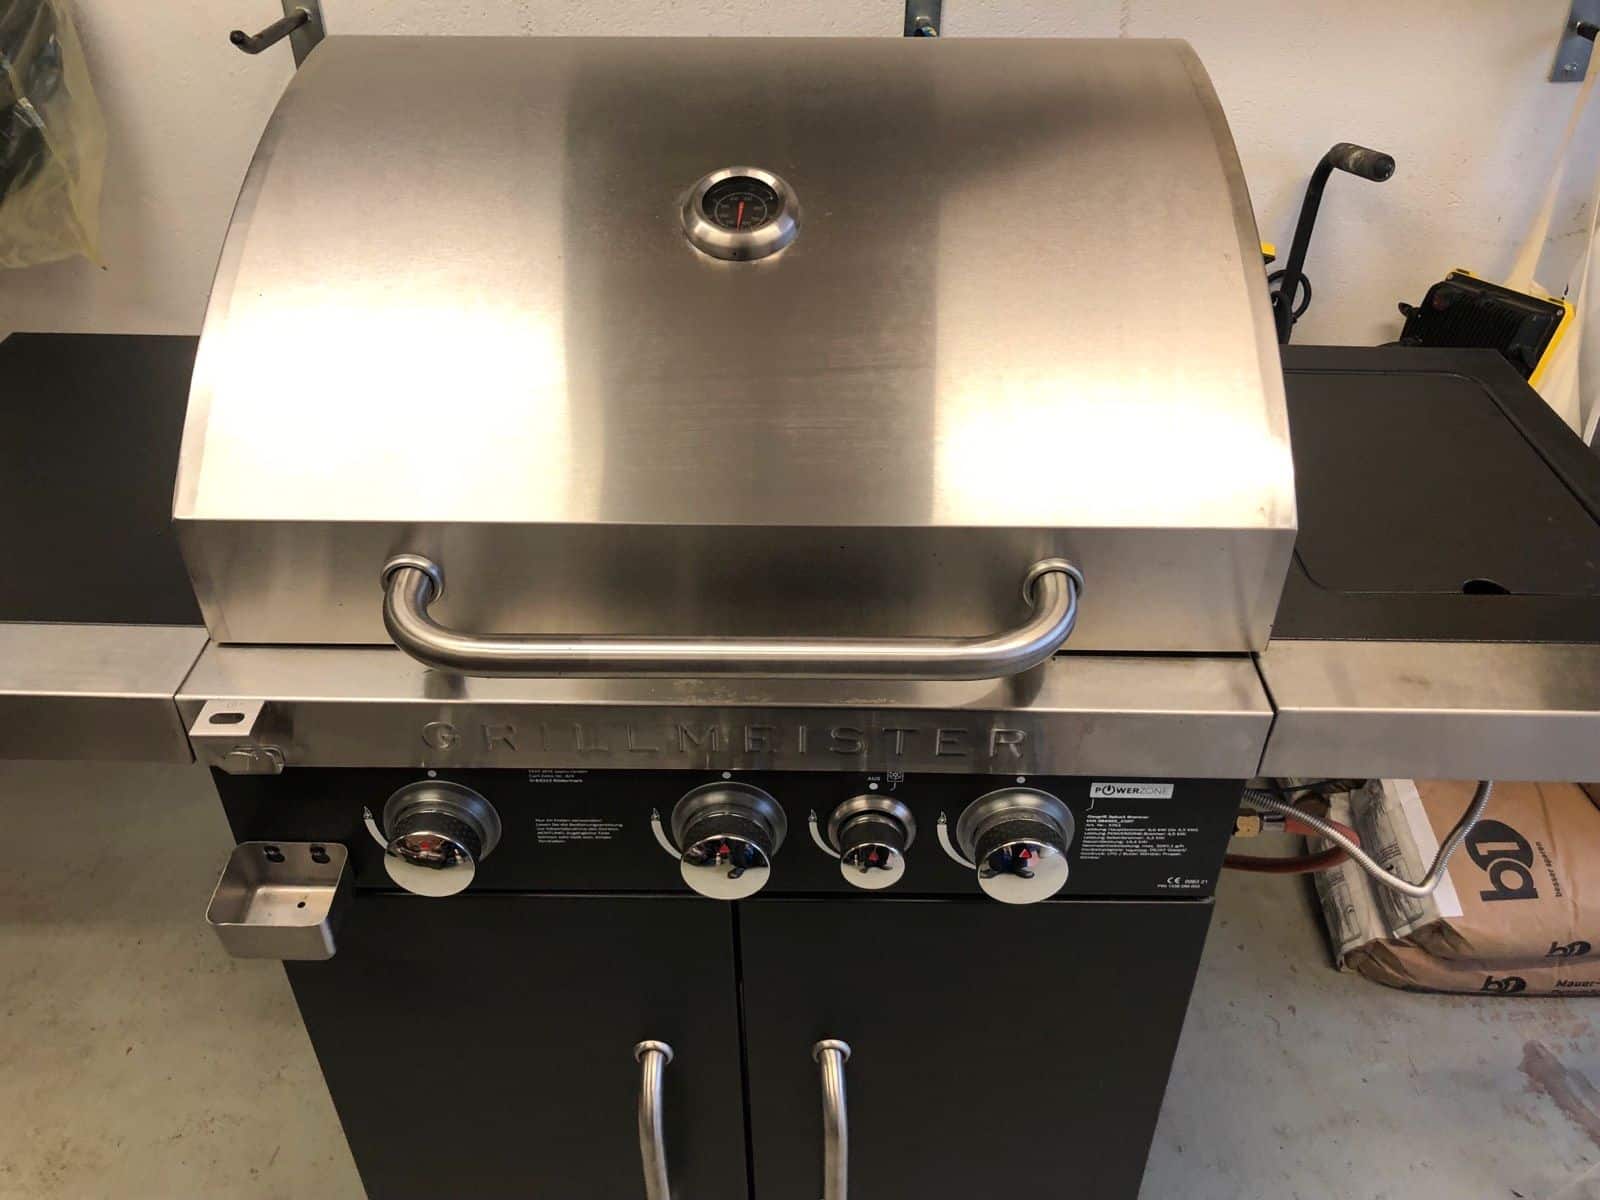 GRILLMEISTER Gasgrill 3plus1 Brenner 14.4 kW